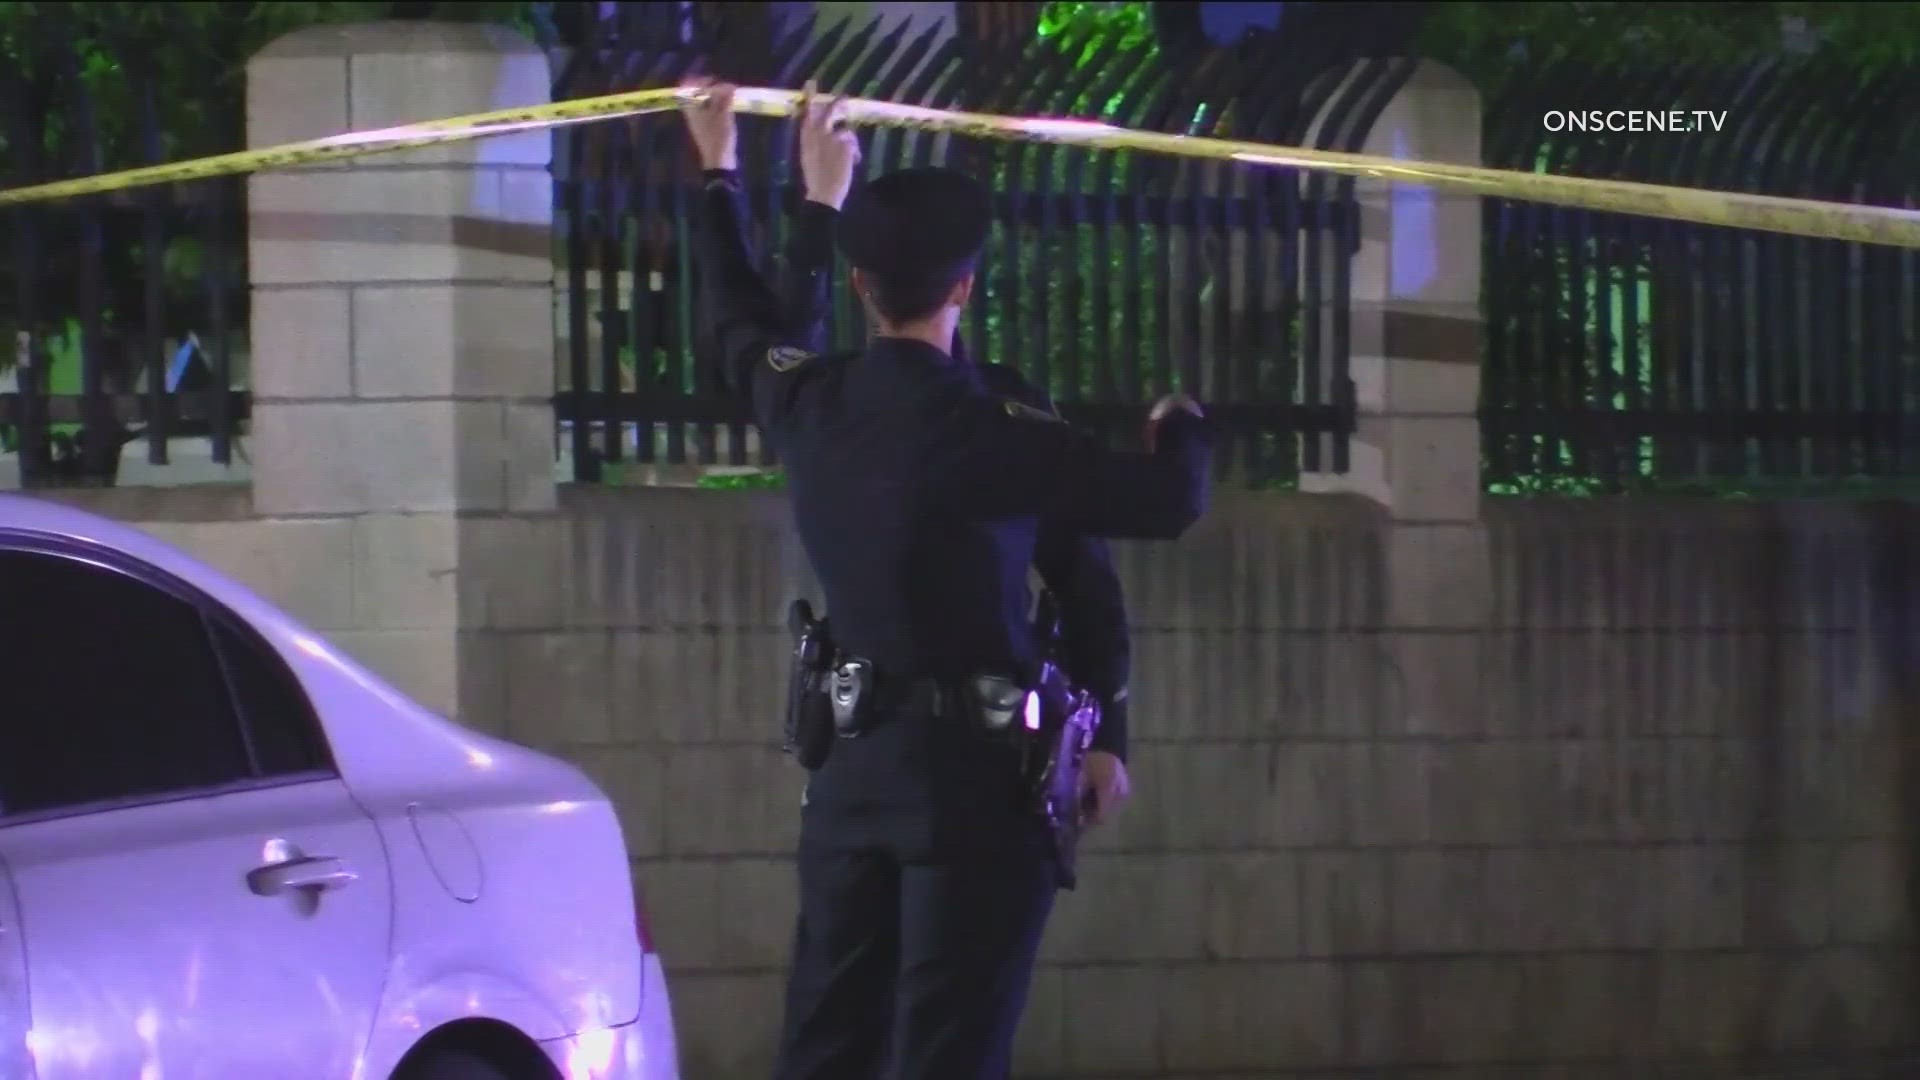 A 22-year-old man was shot and killed by an "acquaintance" while standing in a City Heights driveway, according to San Diego police.